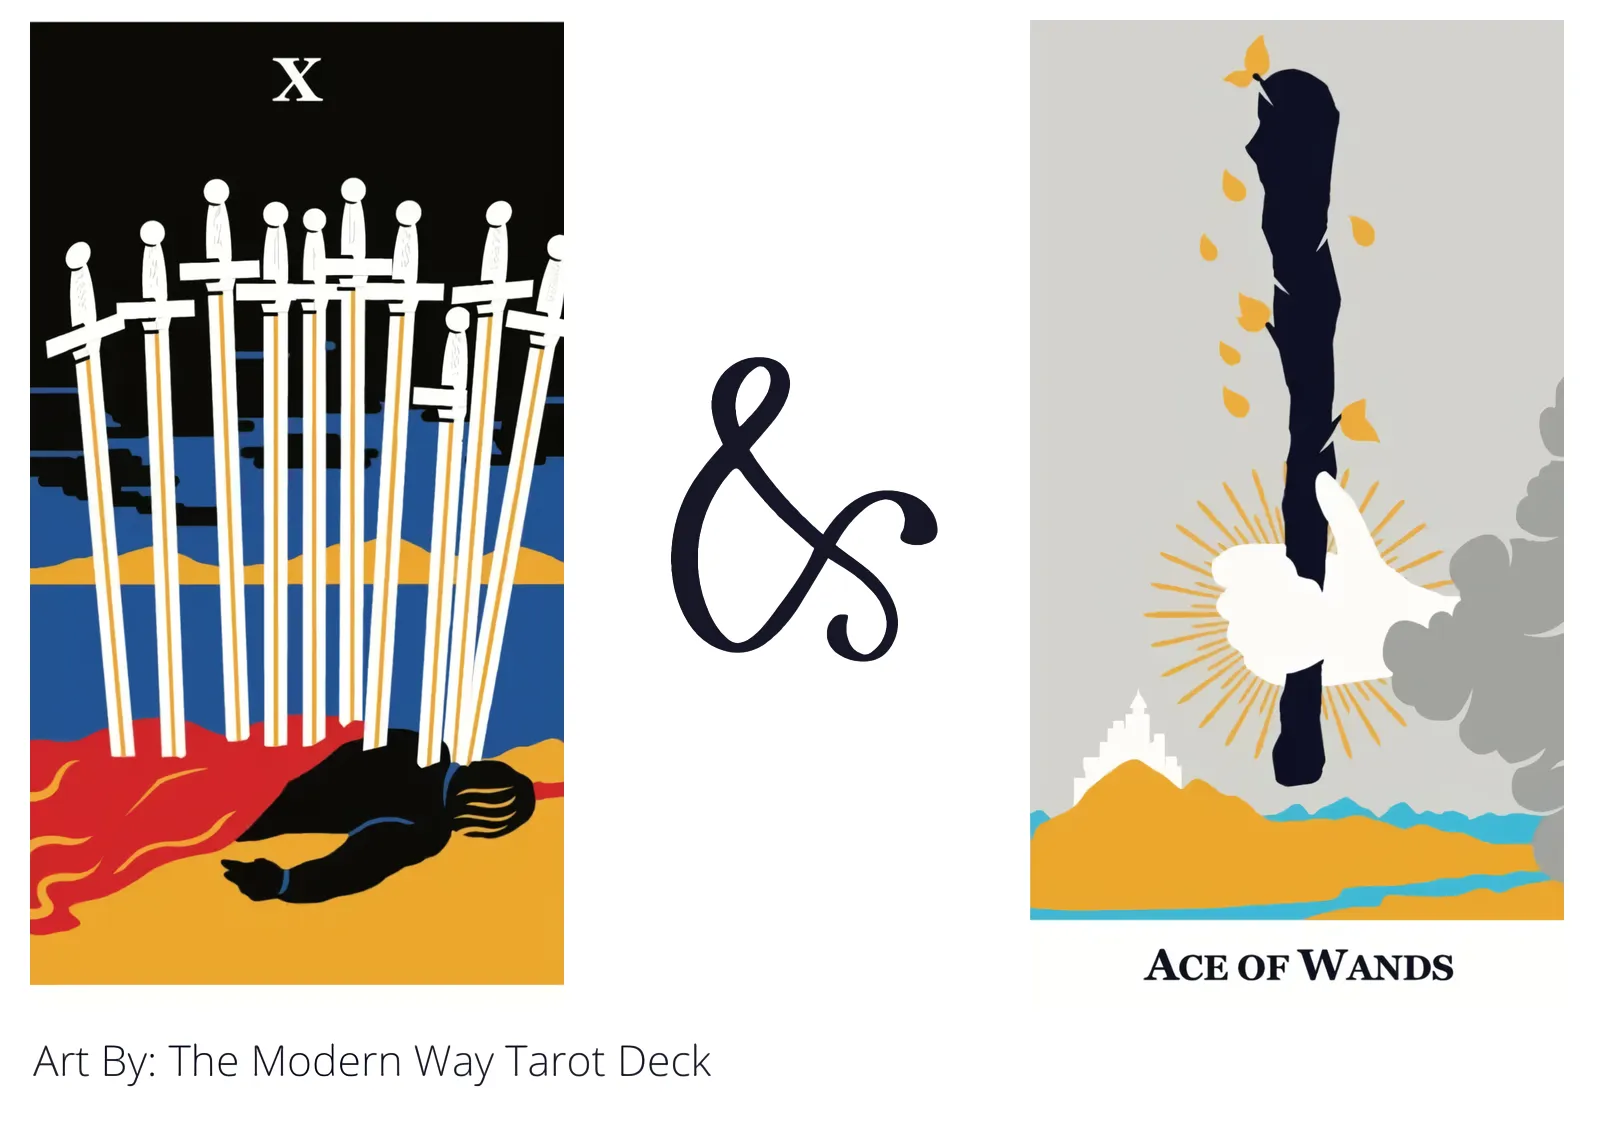 ten of swords and ace of wands tarot cards together